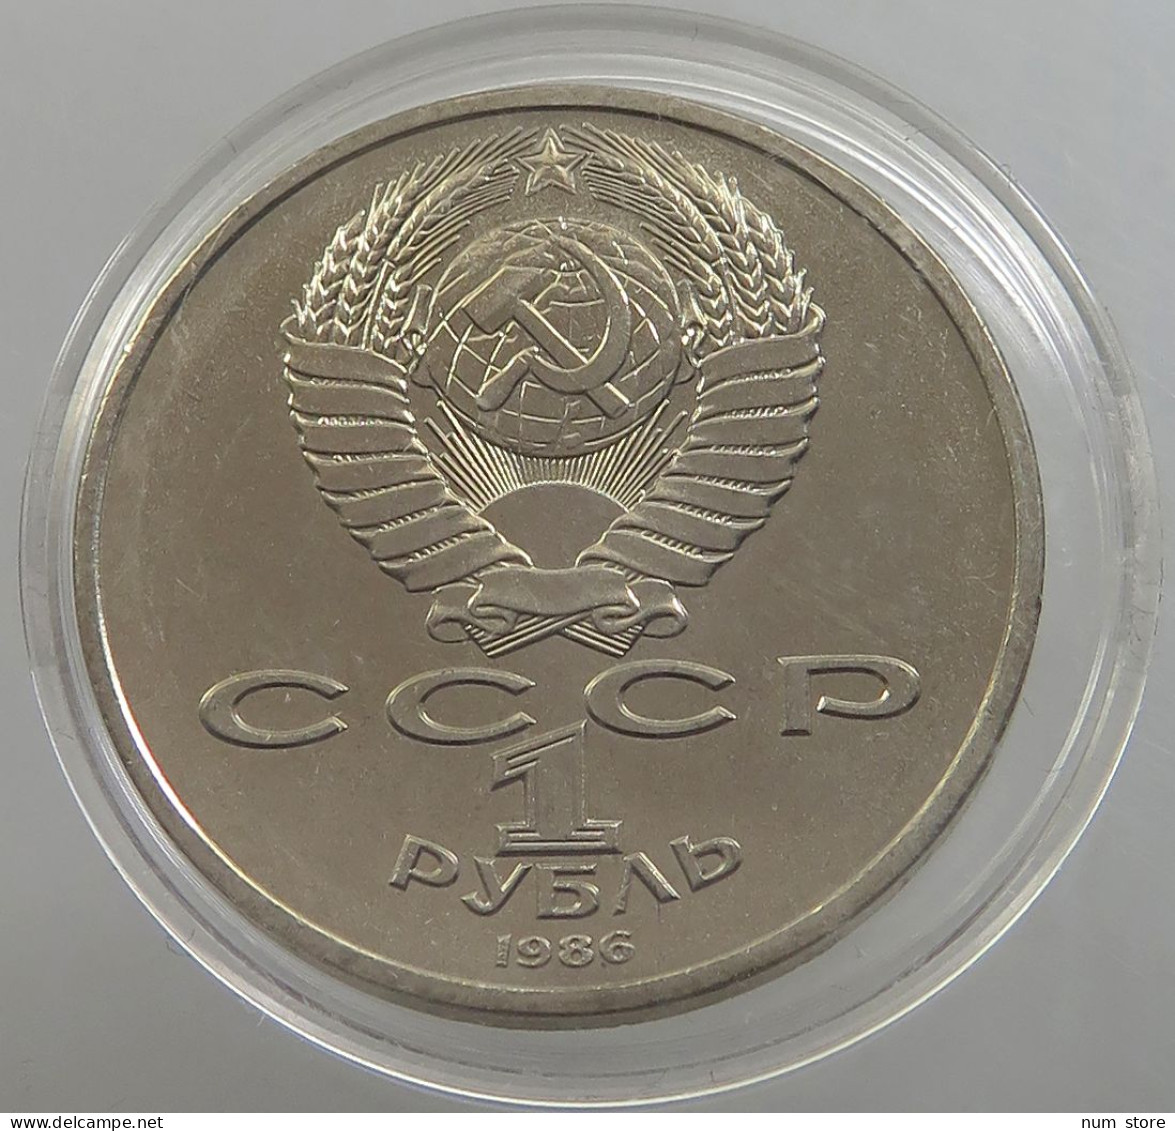 RUSSIA USSR 1 ROUBLE 1986 #sm14 0629 - Russia